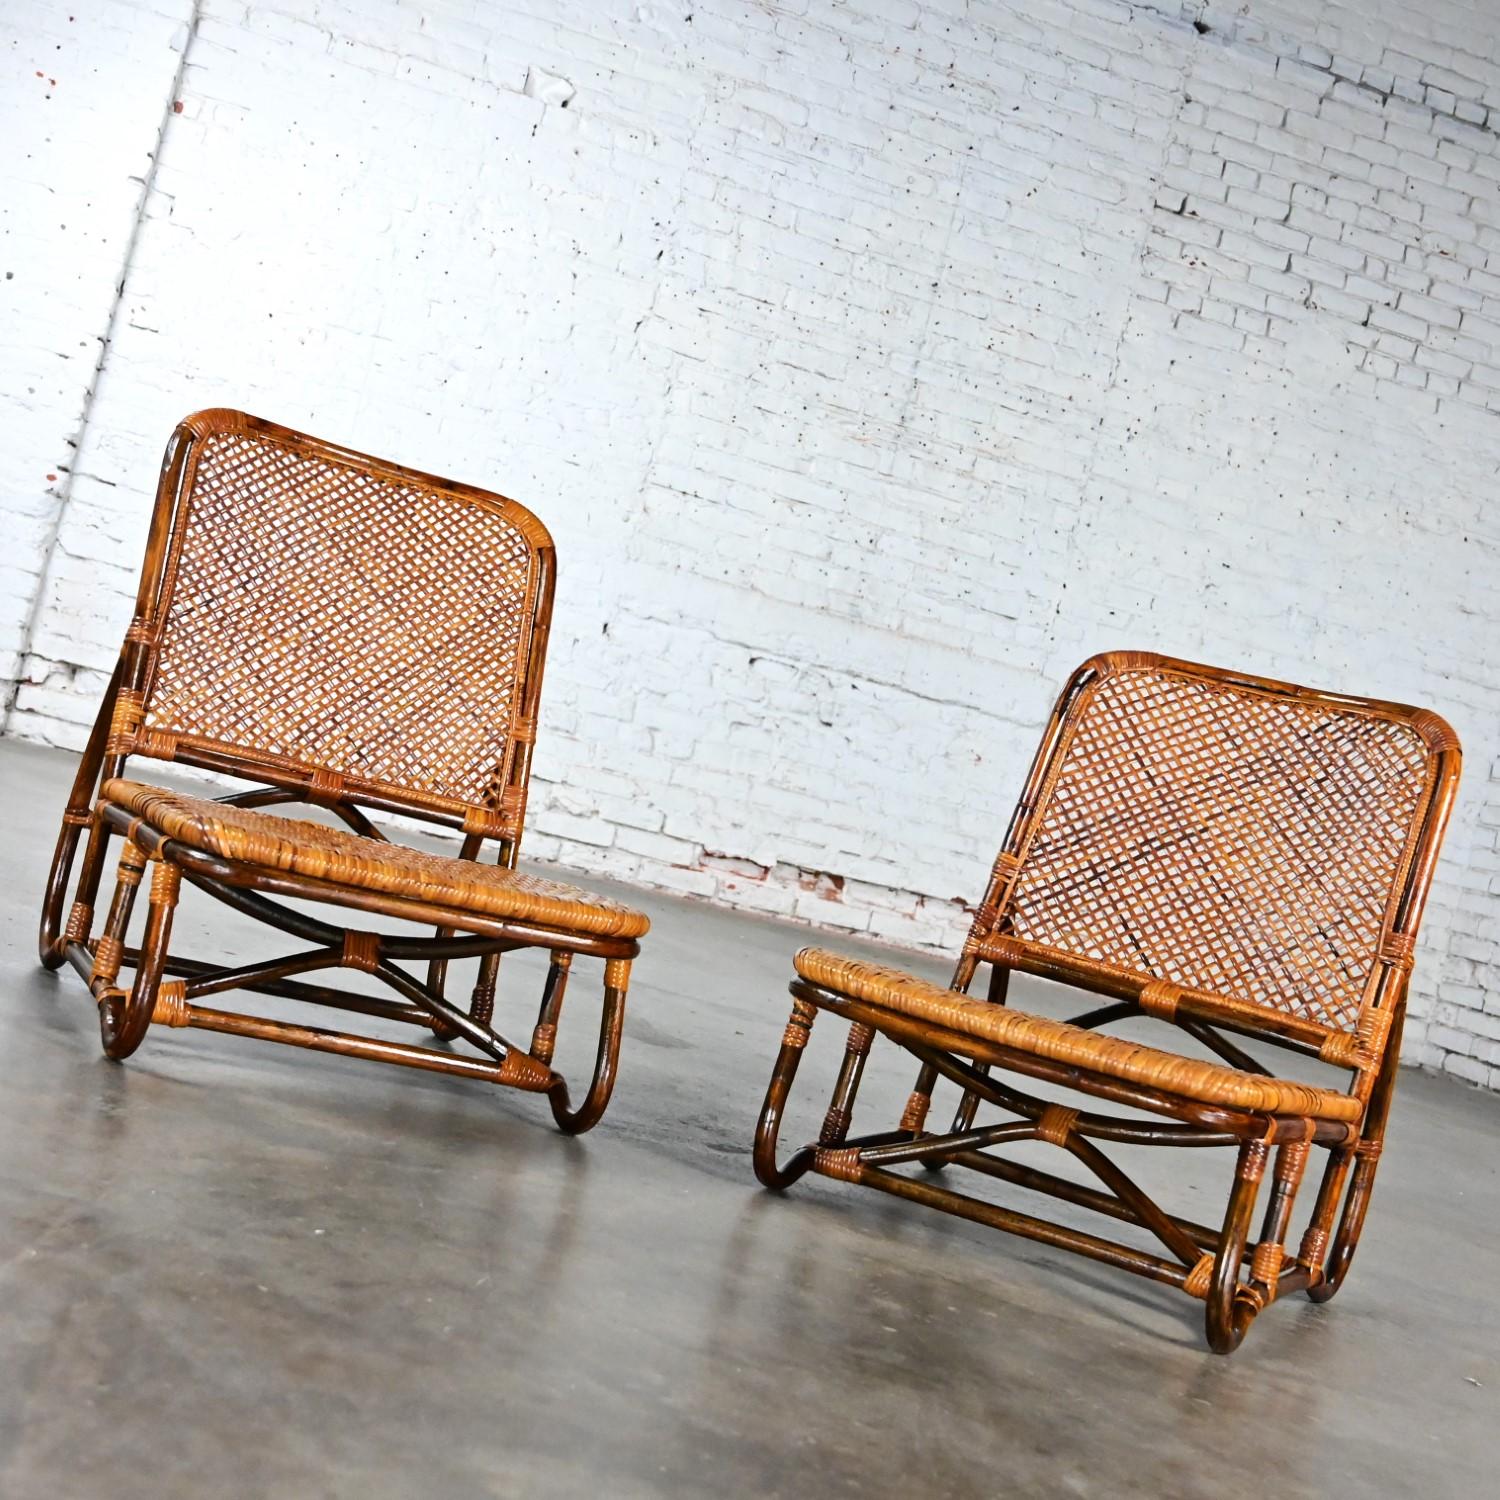 MCM Coastal Rattan & Wicker Low Legless or Zaisu Lounge Chairs Style Calif Asia In Good Condition For Sale In Topeka, KS